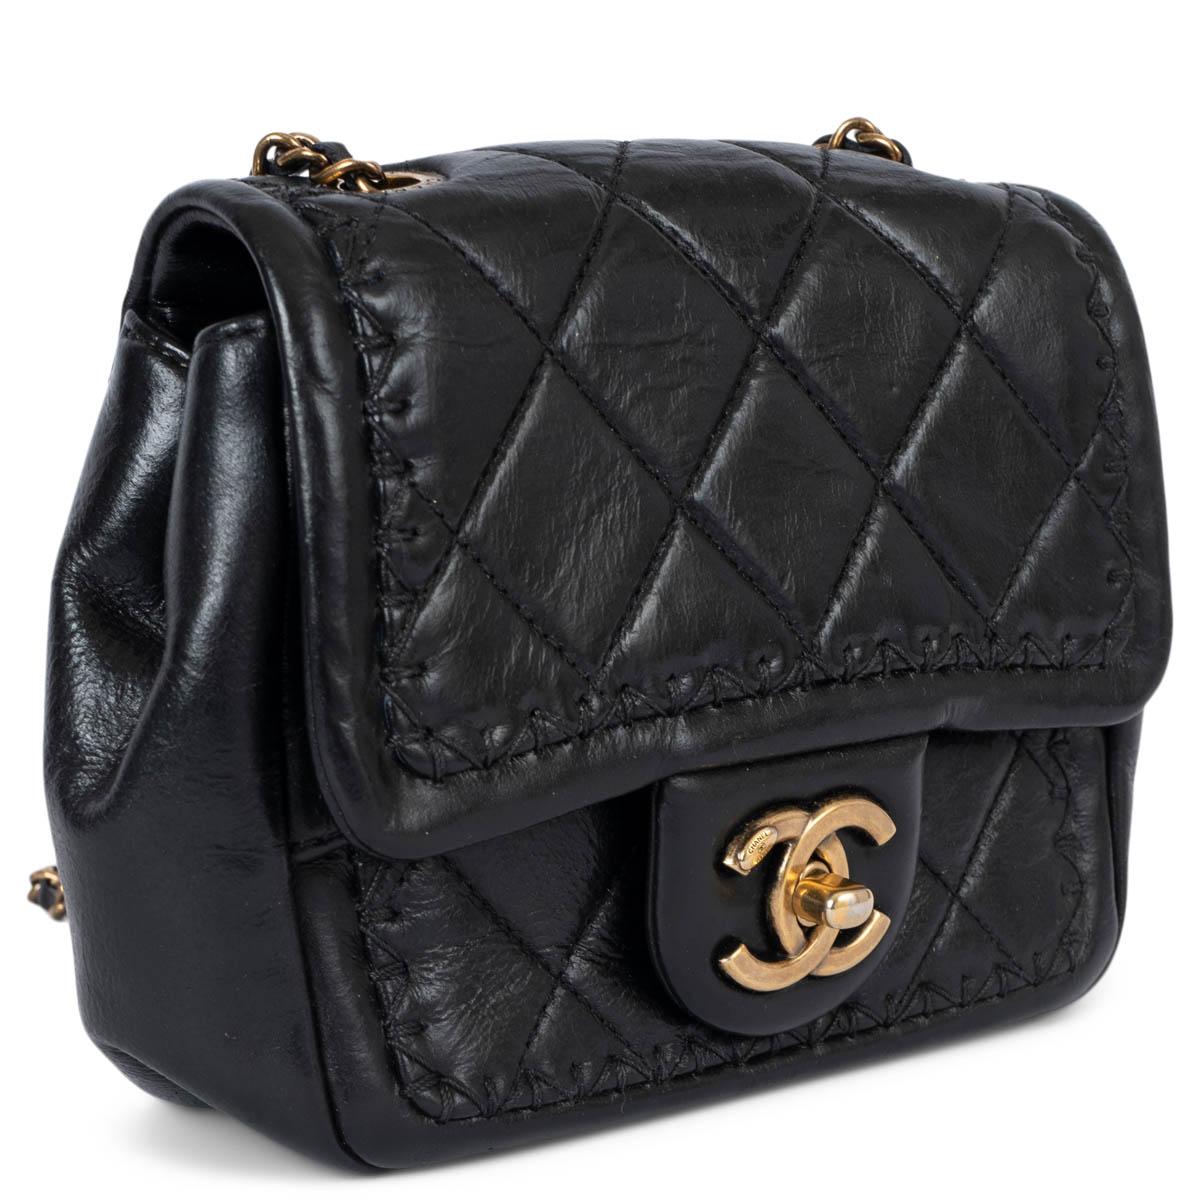 100% authentic Chanel quilted mini shoulder bag in black aged calfskin featuring antique gold-tone hardware and tonal stitching details. The design comes with a classic CC turn-lock and the bag is line in burgundy grosgrain with one slit pocket